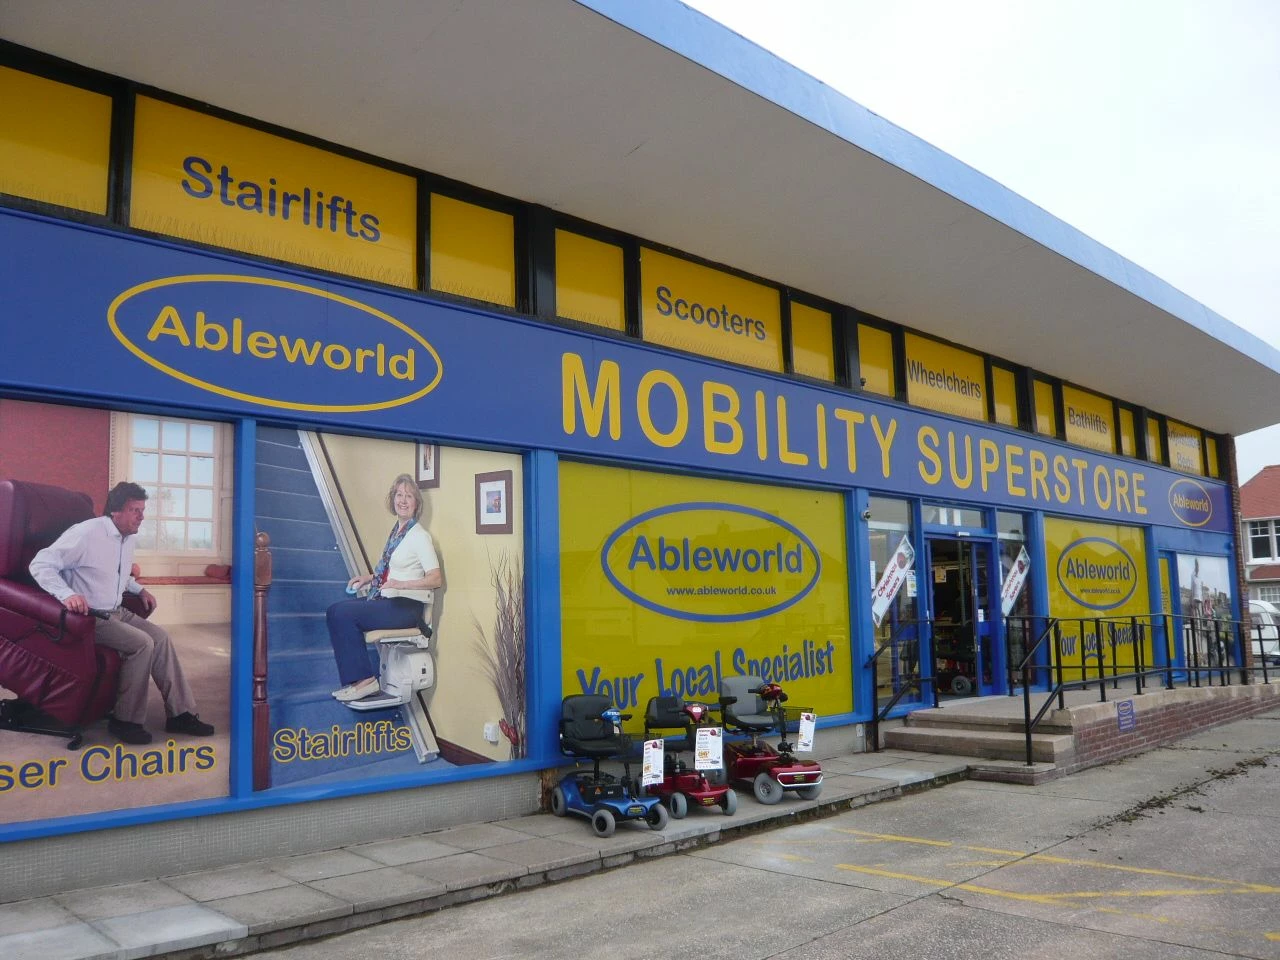 Ableworld Mobility Superstore